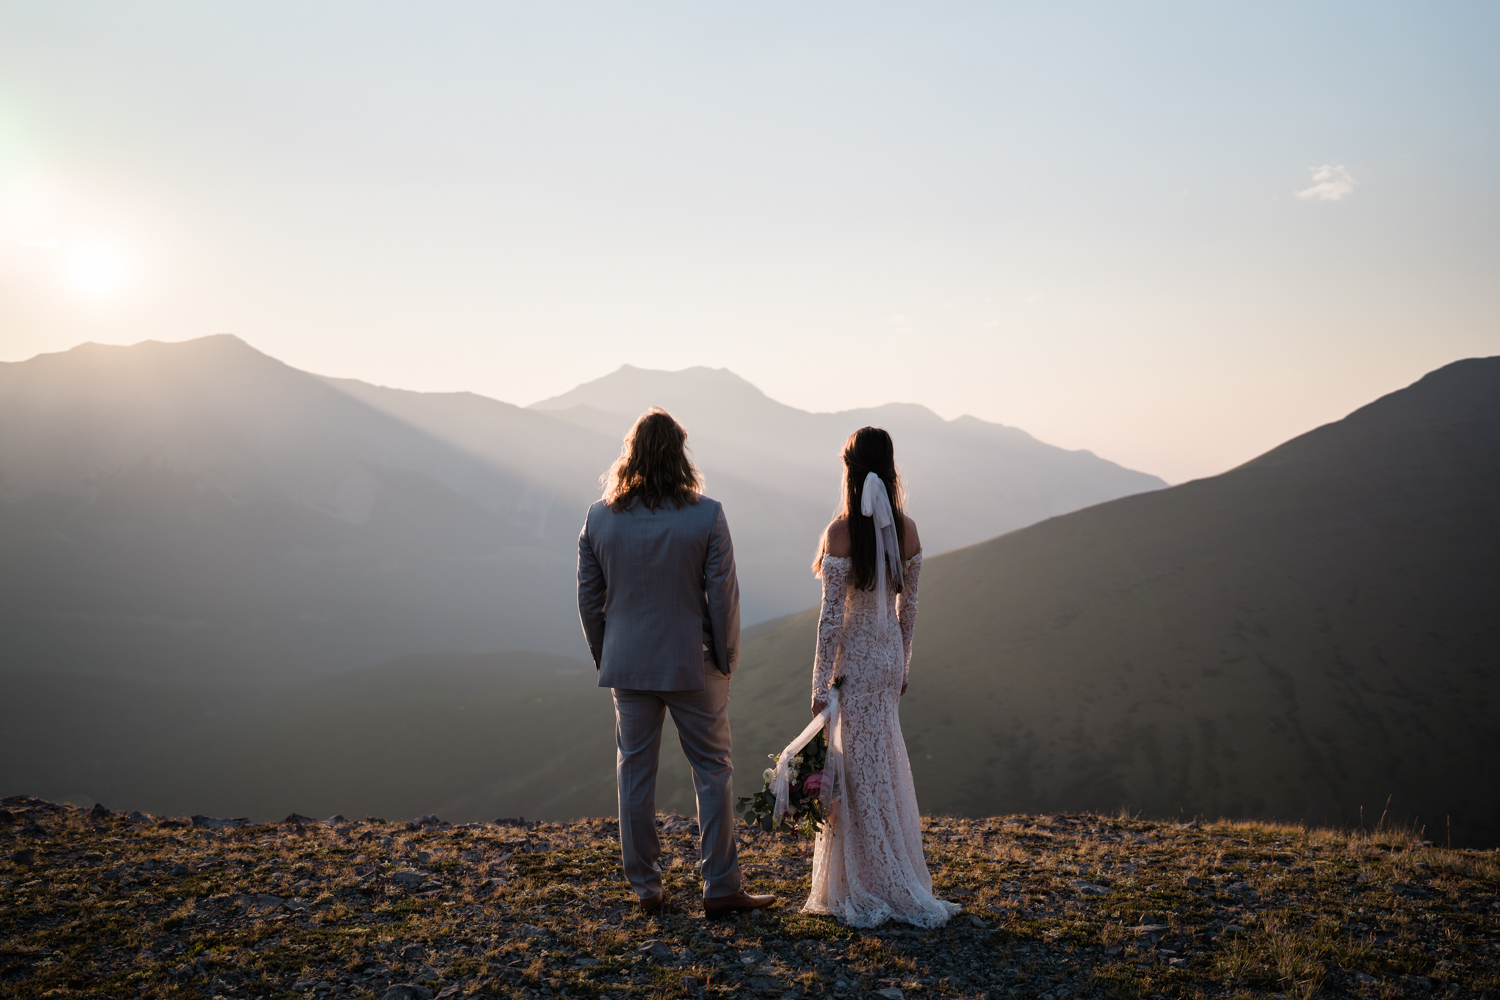 The first light of day kissing the mountains during a serene backcountry camping elopement in Alberta's Kananaskis.